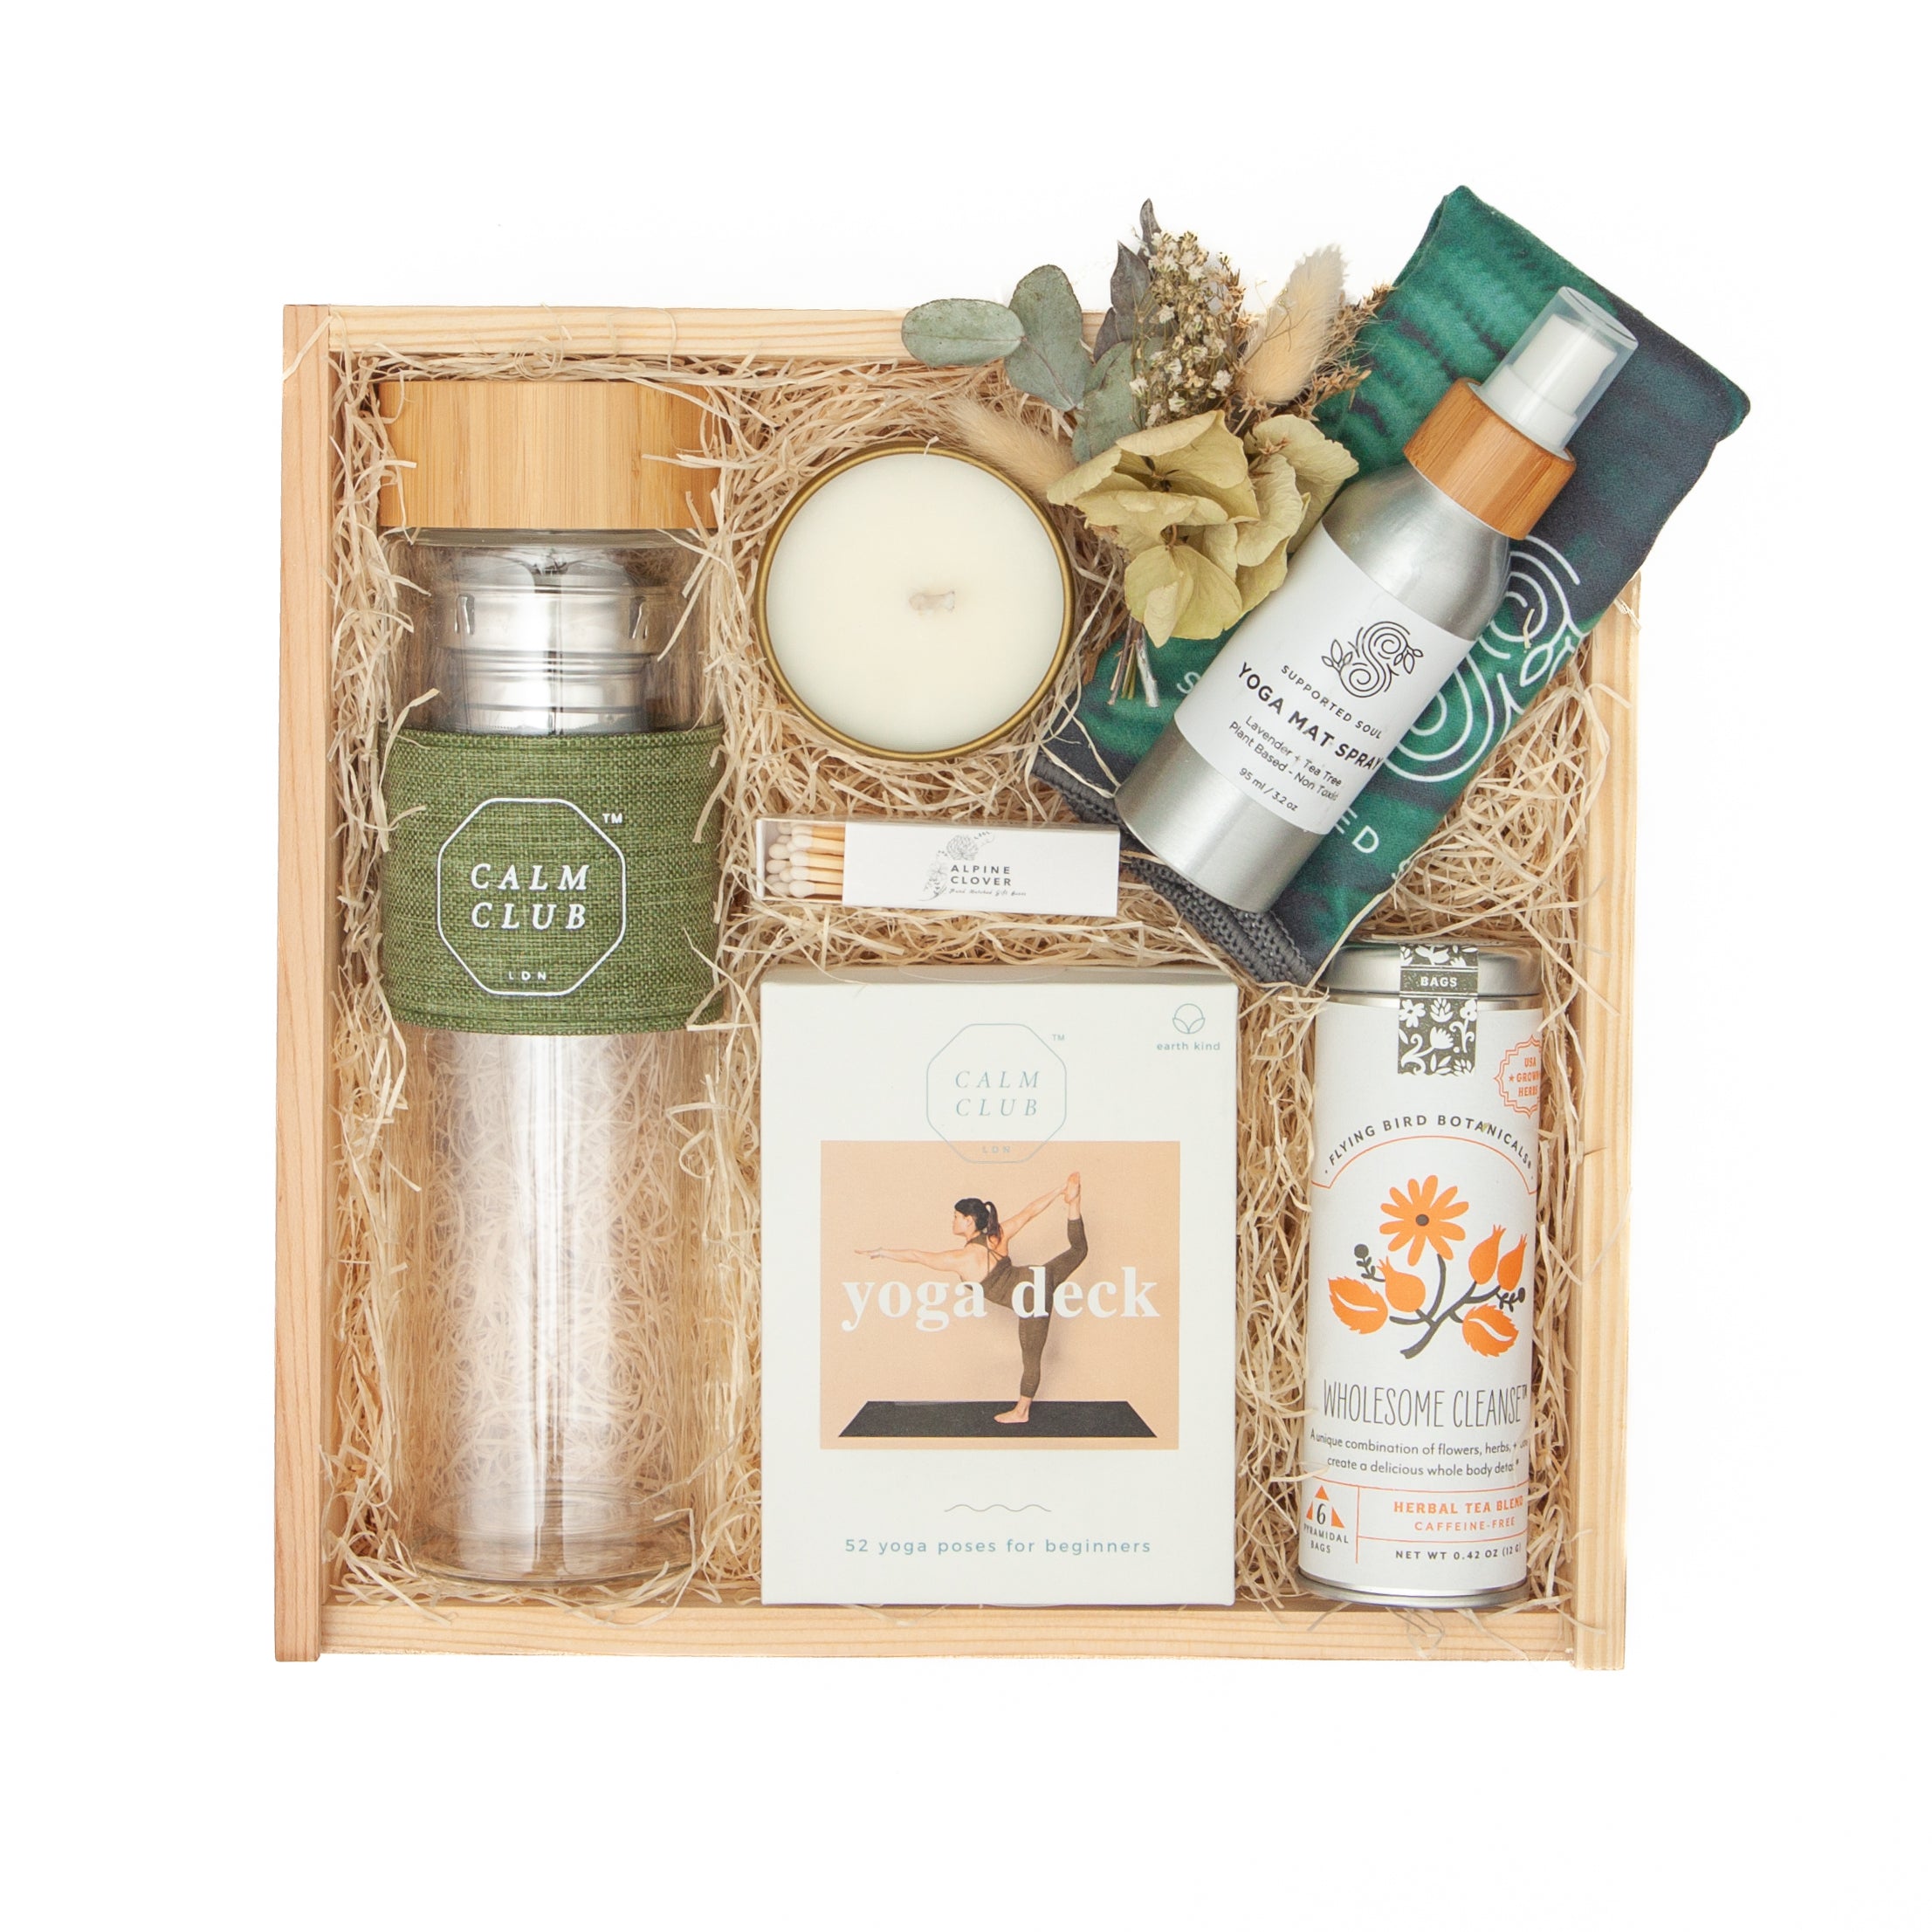 One Month Unlimited Yoga Gift Box Inlet Yoga Studio